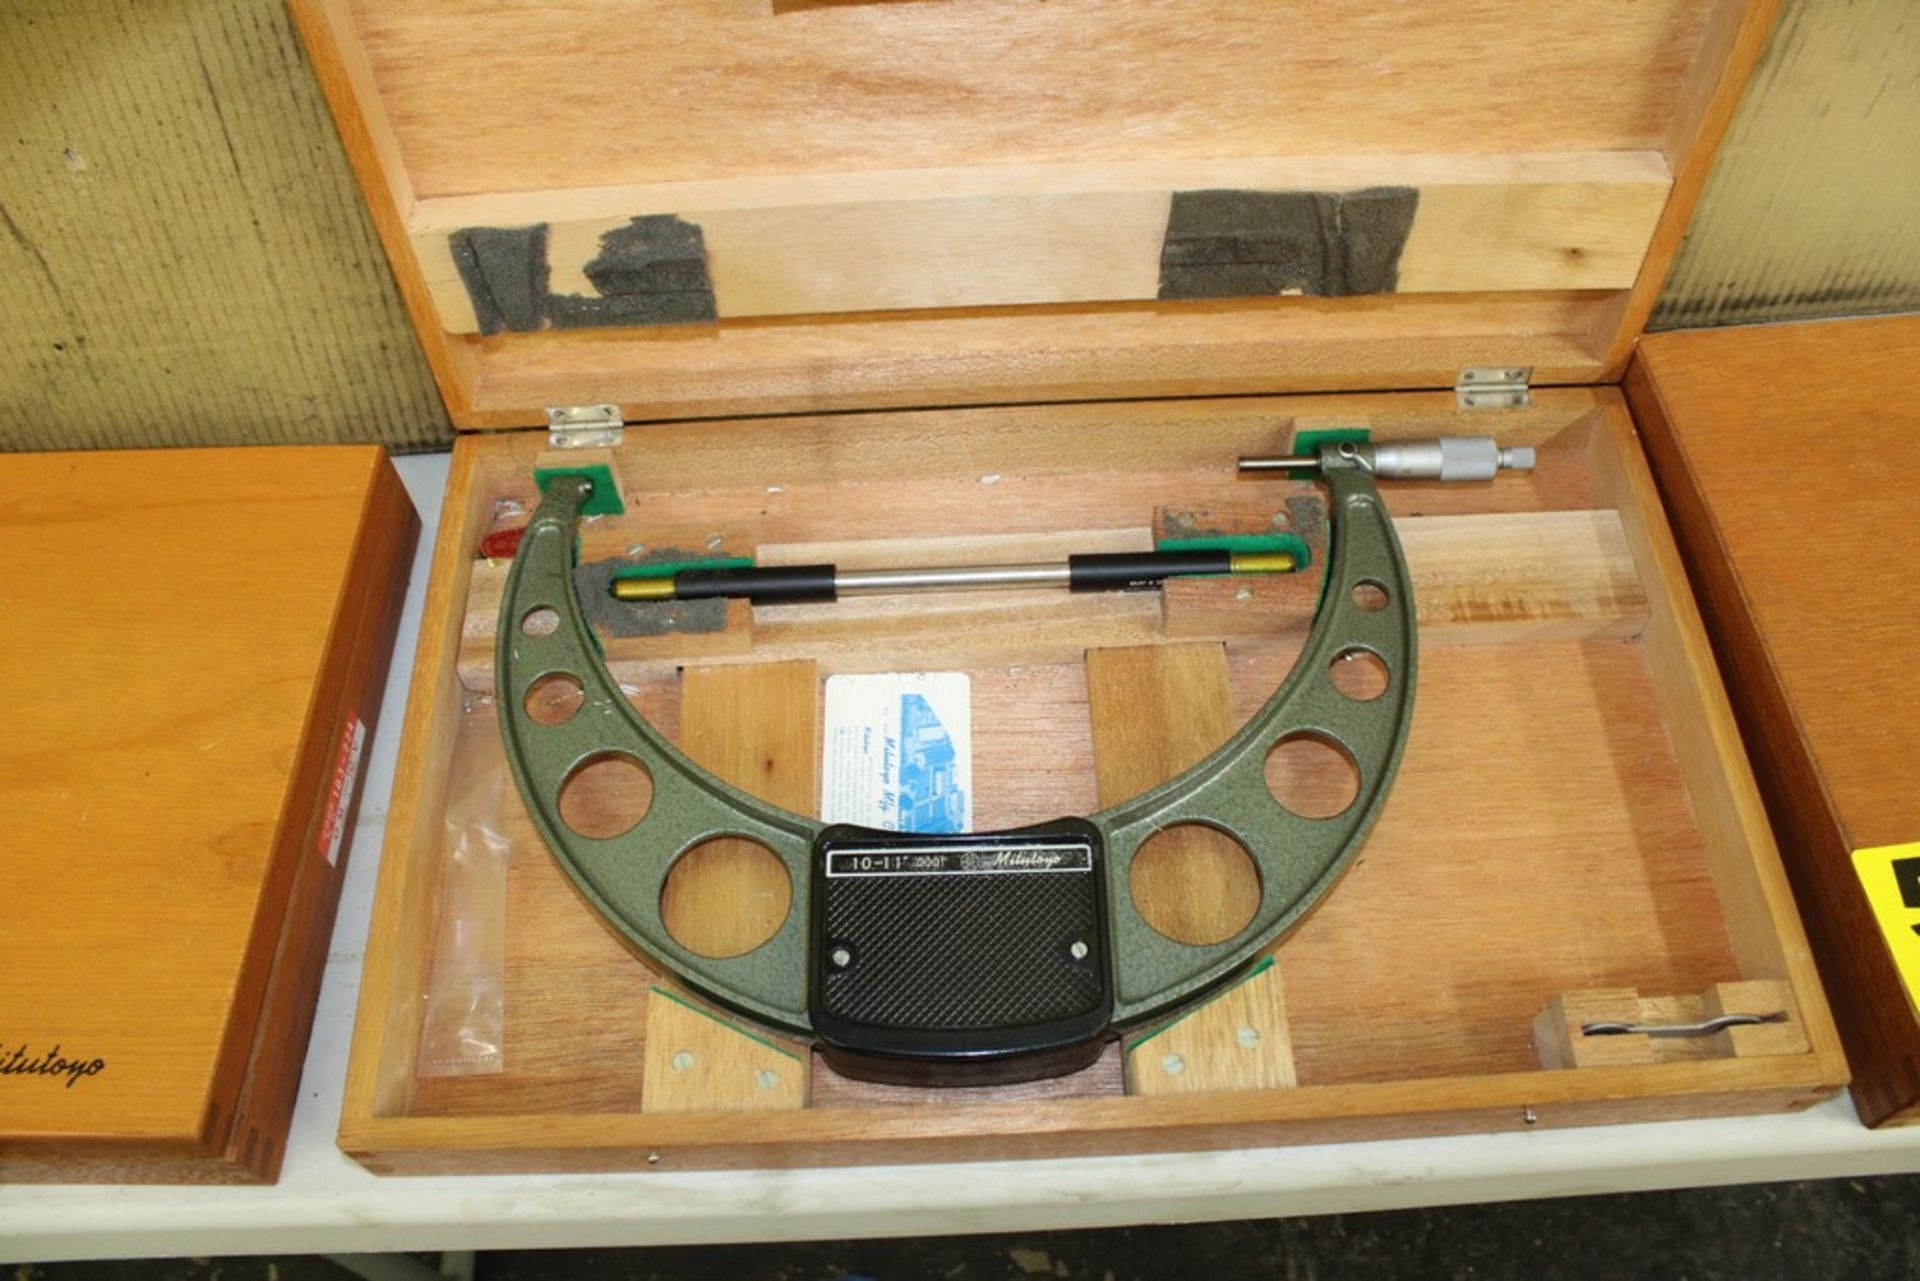 MITUTOYO NO. 103-225 10-11" MICROMETER WITH STANDARDS